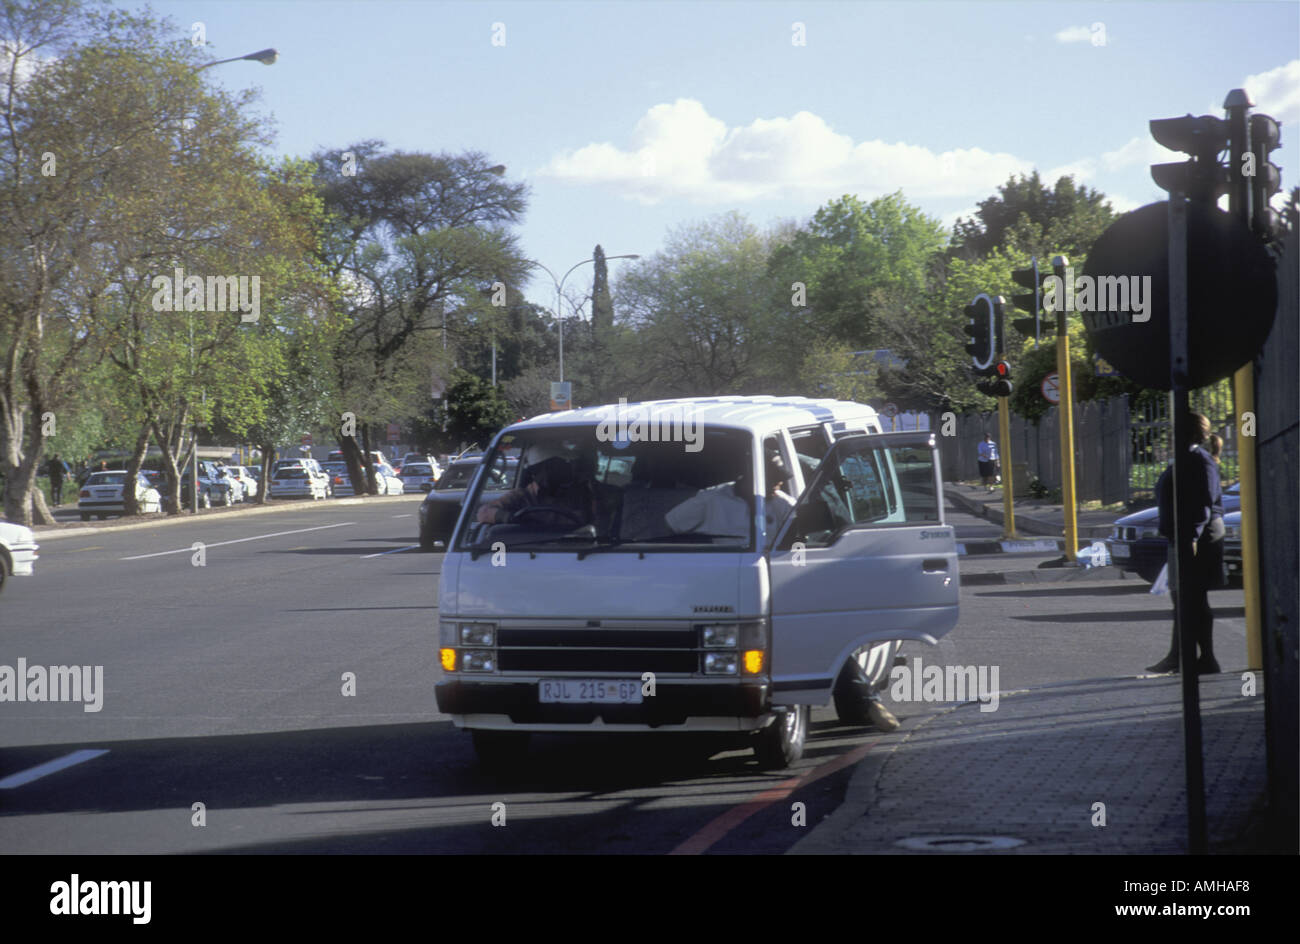 Minibus style taxi stopping for passengers to alight at Sandton City shopping centre Johannesburg South Africa Stock Photo